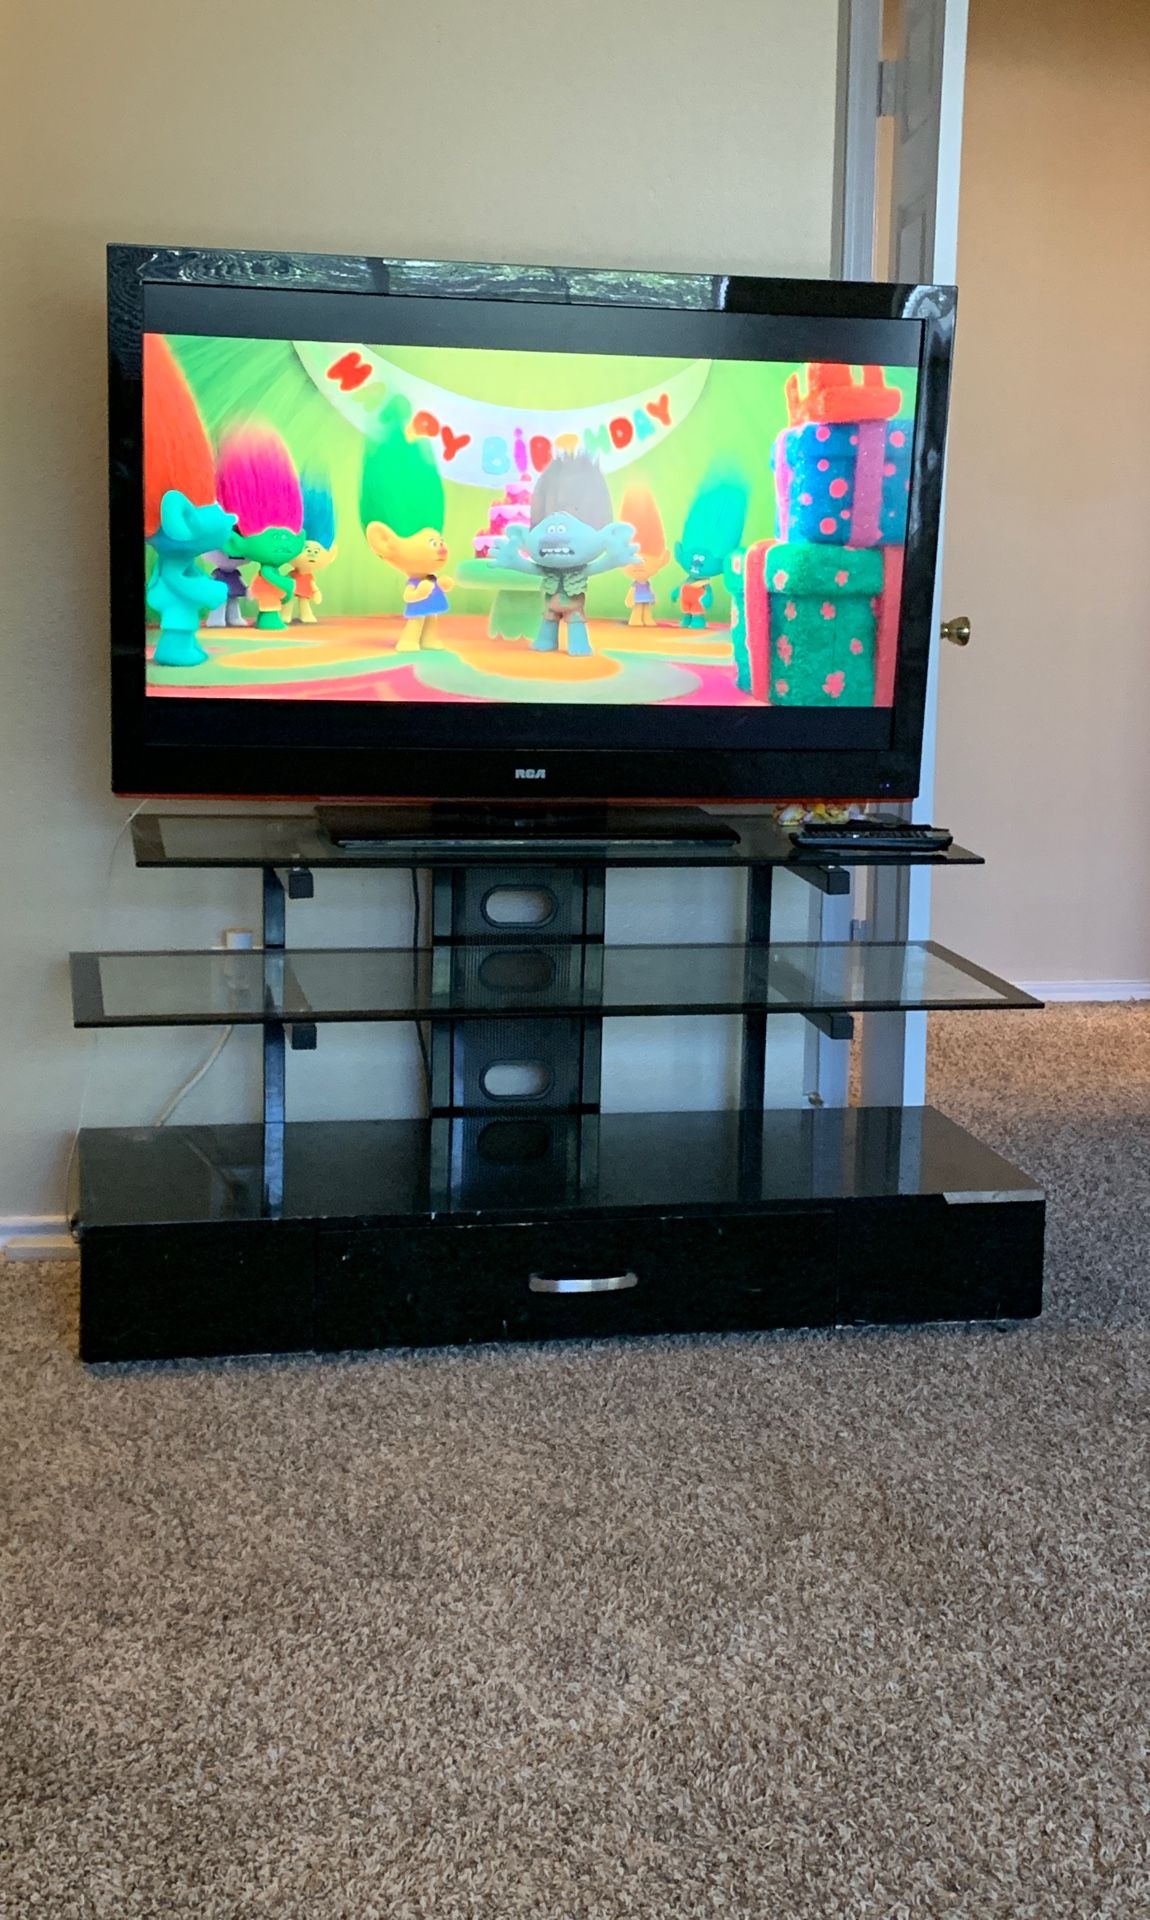 Free TV stand